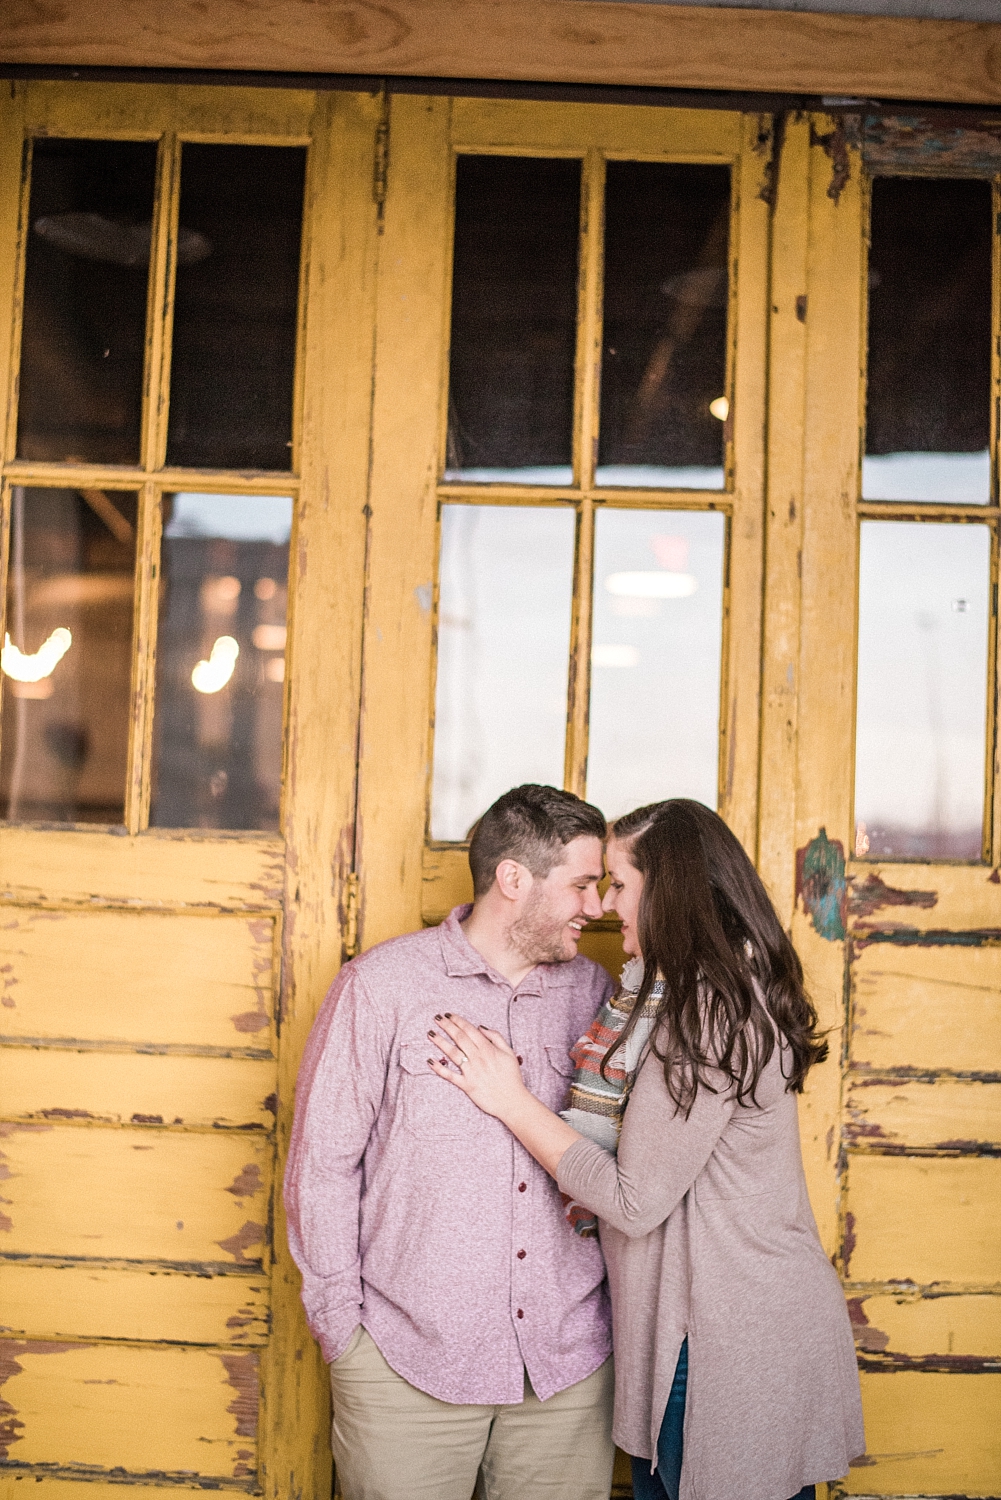 Top places to do engagements in downtown Knoxville | Juicebeats Photography | Knoxville Wedding Photographer | The Standard Knoxville